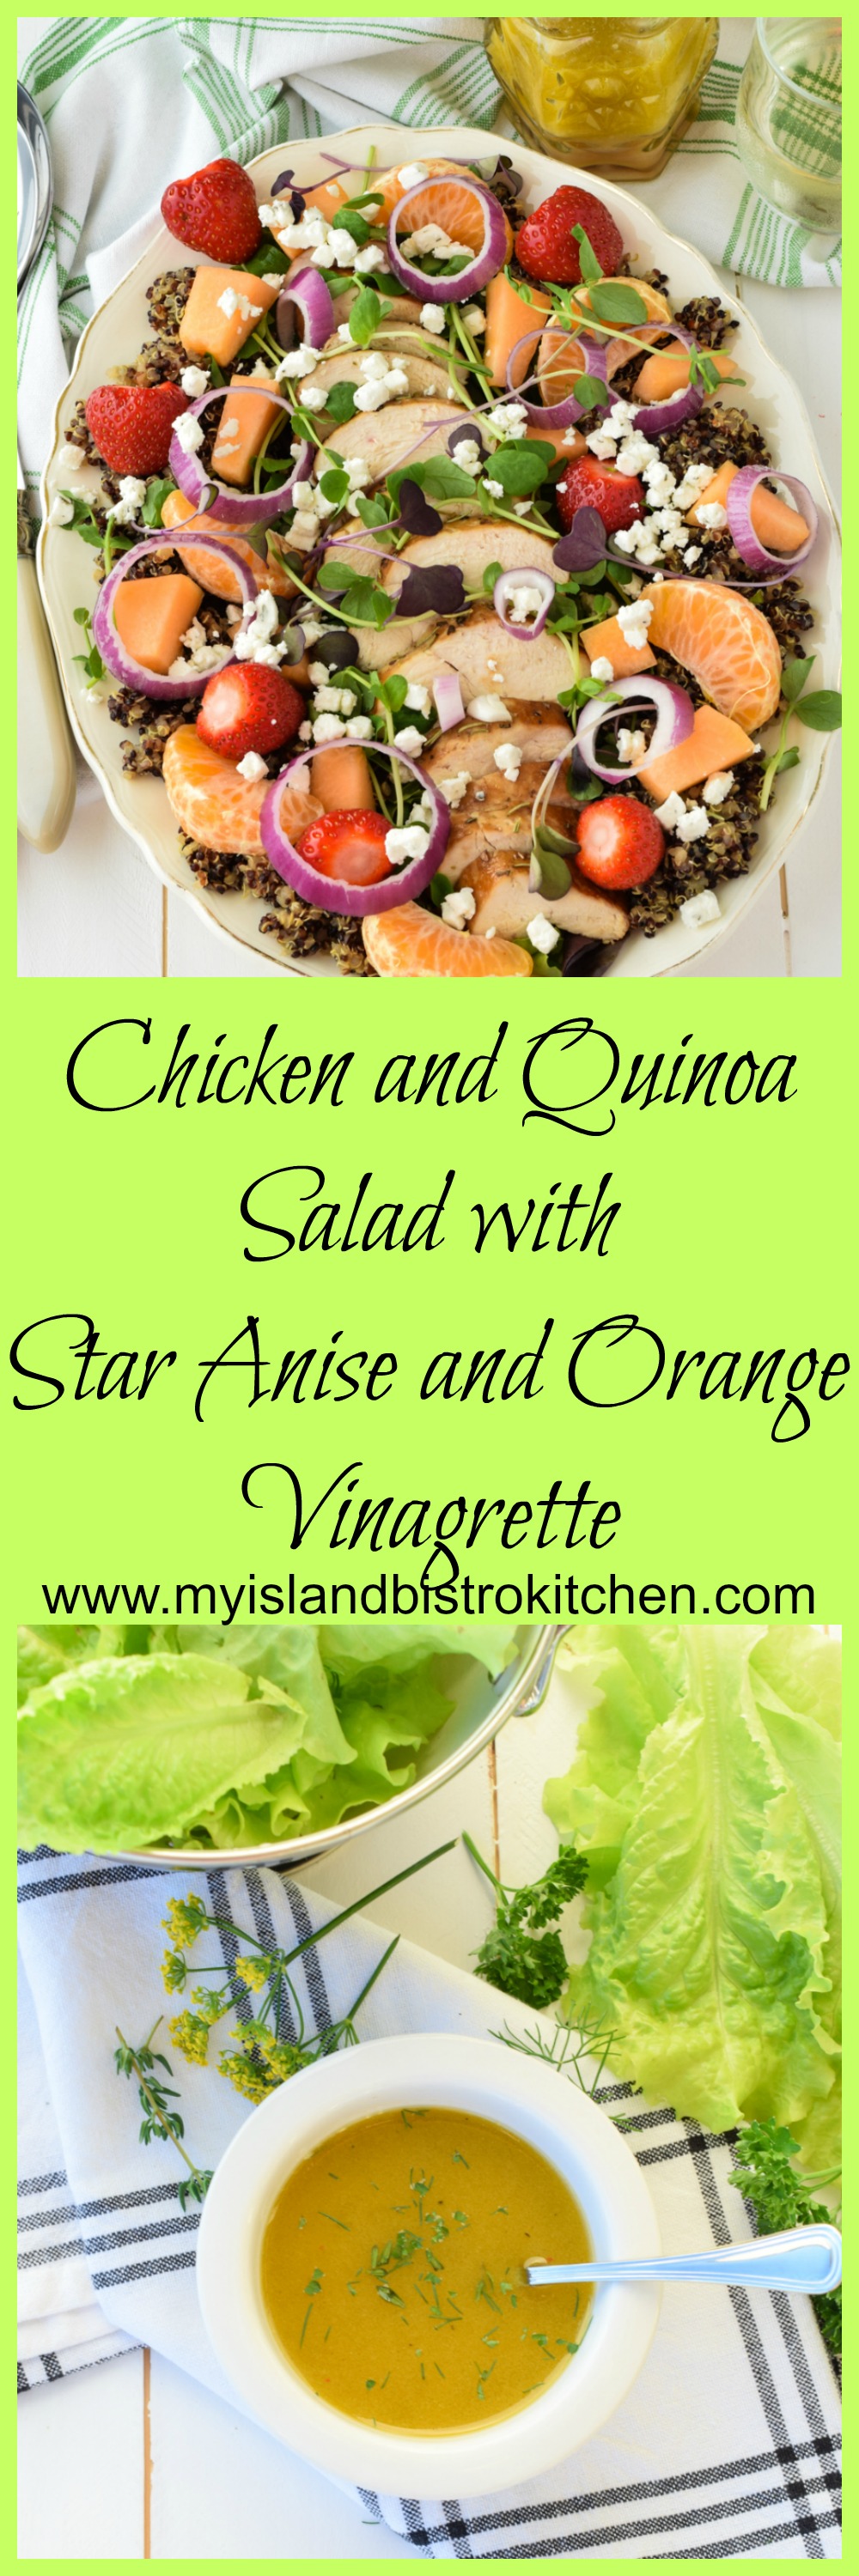 Chicken and Quinoa Salad with Star Anise and Orange Vinaigrette